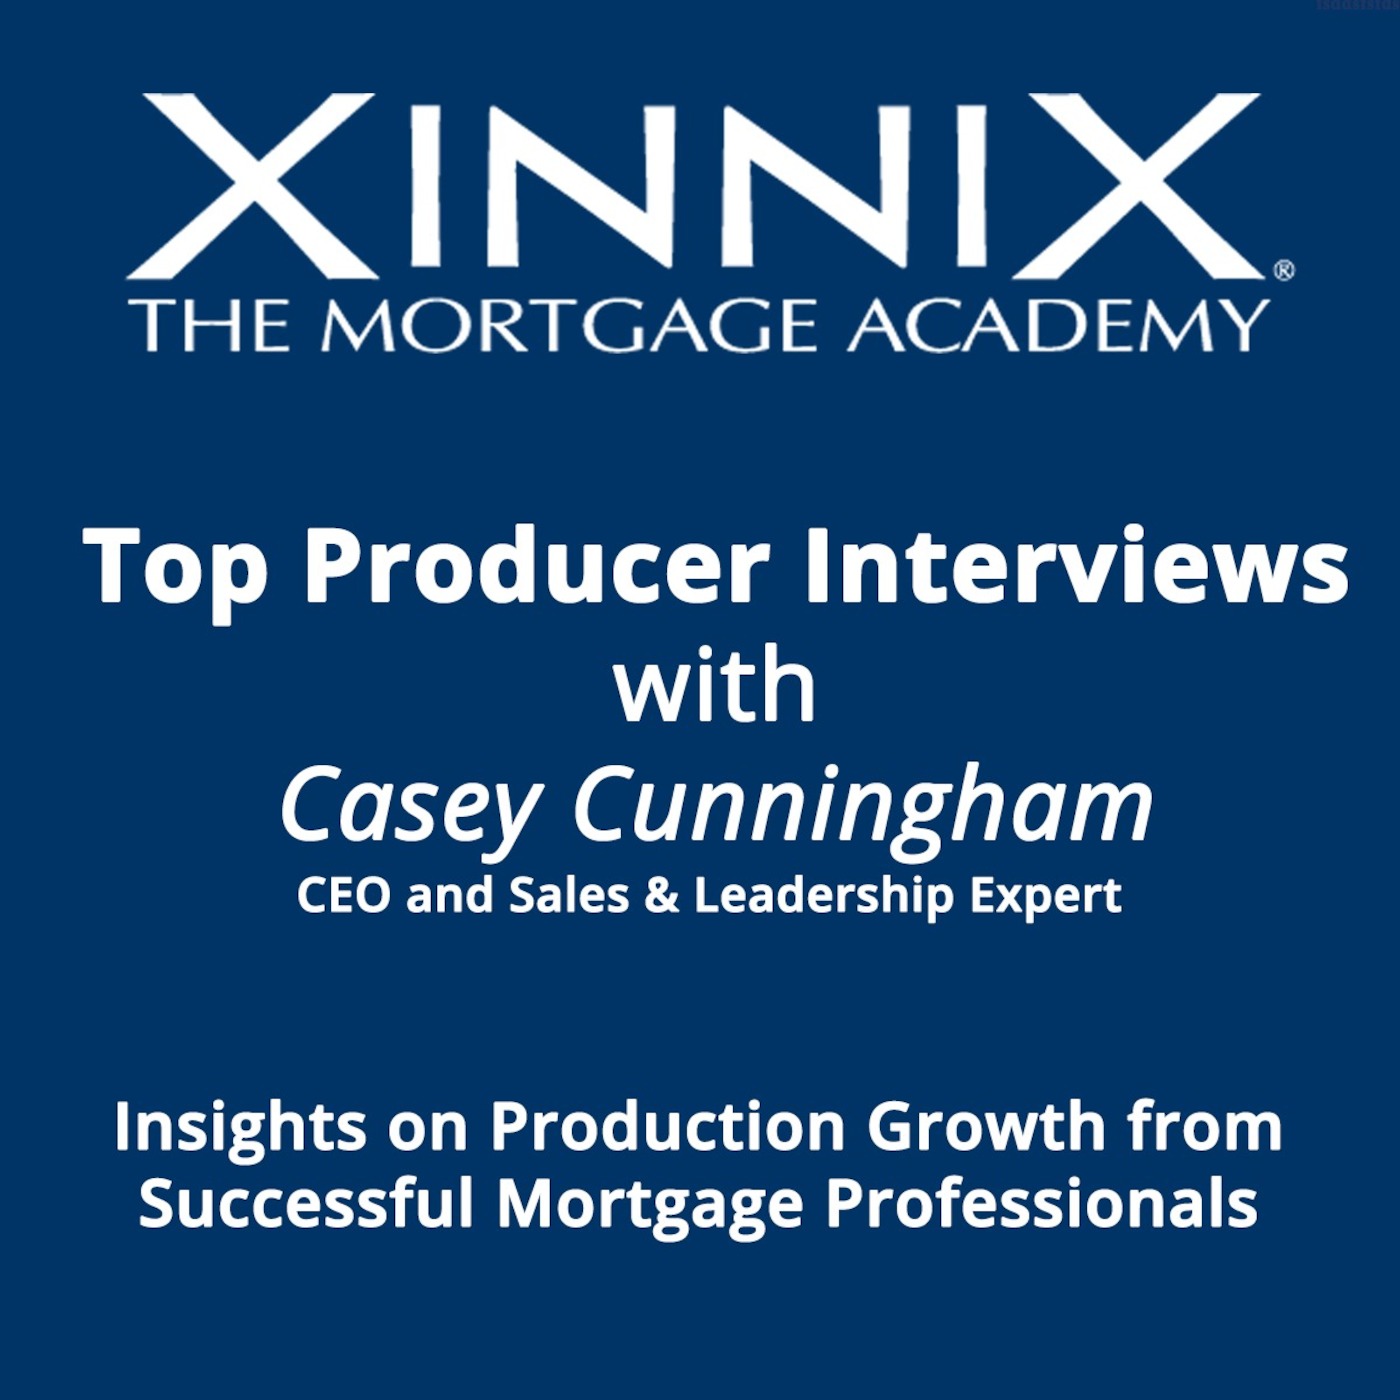 Top Producer Interviews with Casey Cunningham